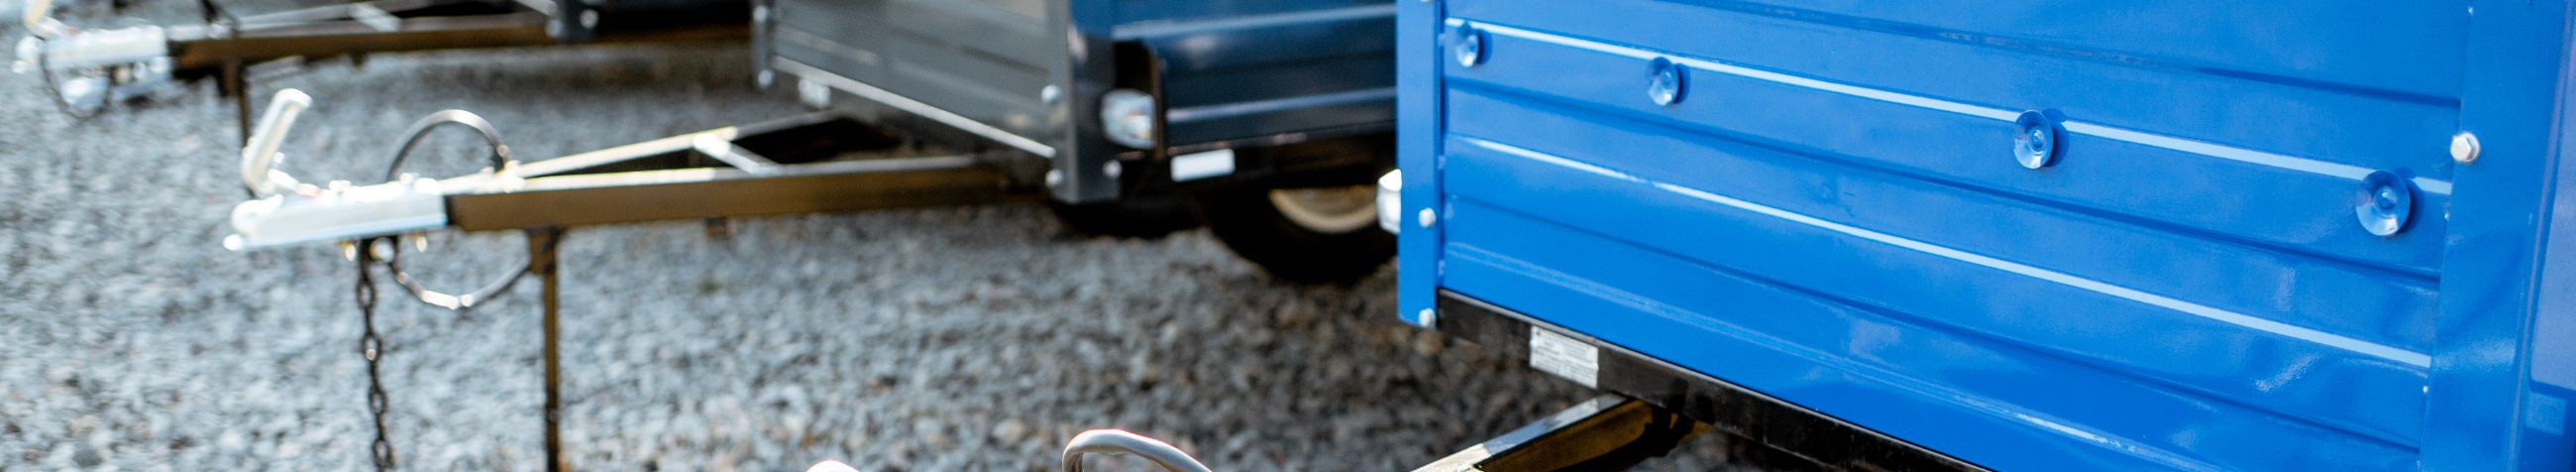 We specialize in offering a wide range of trailers for rent, including platform trailers, car trailers, custom trailers, braked trailers, boat trailers, and forest carts, complemented by repair and maintenance services.